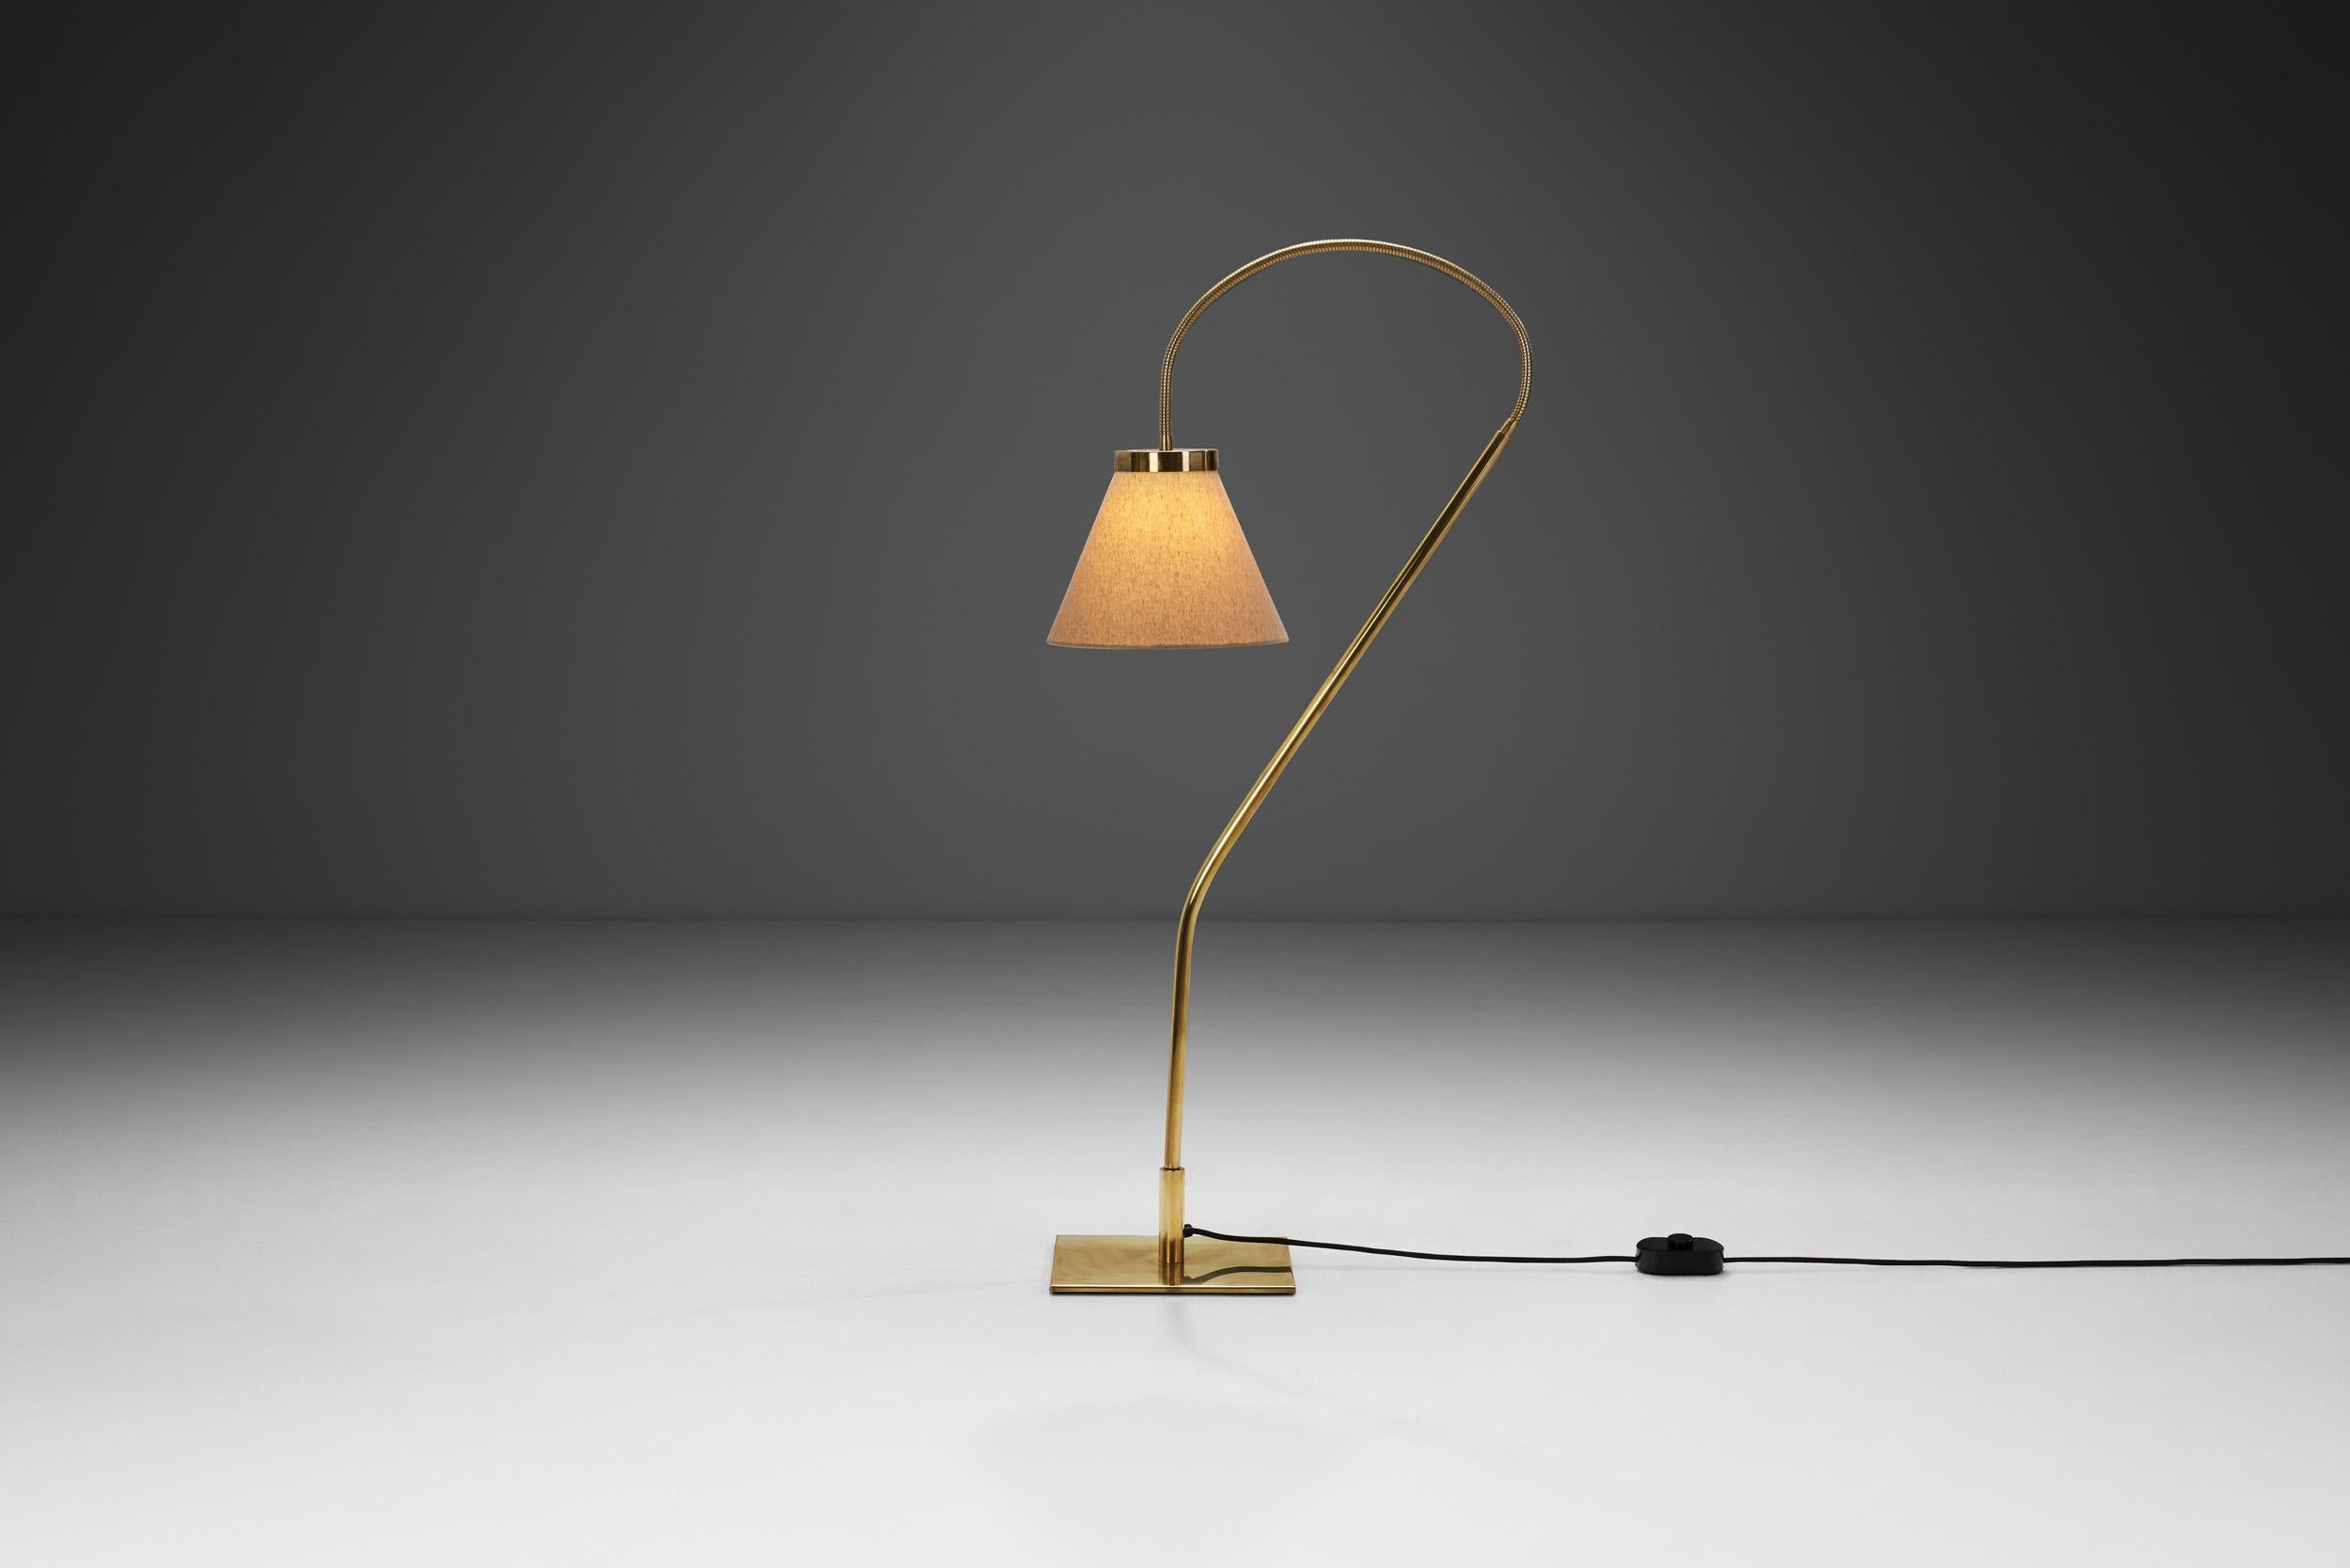 Swedish Modern, with its simplified lines and lack of excessive ornamentation, was a counter reaction to the earlier, more decorative design movements such as Art Deco. In comparison, as this floor lamp demonstrates, the mid-century era brought